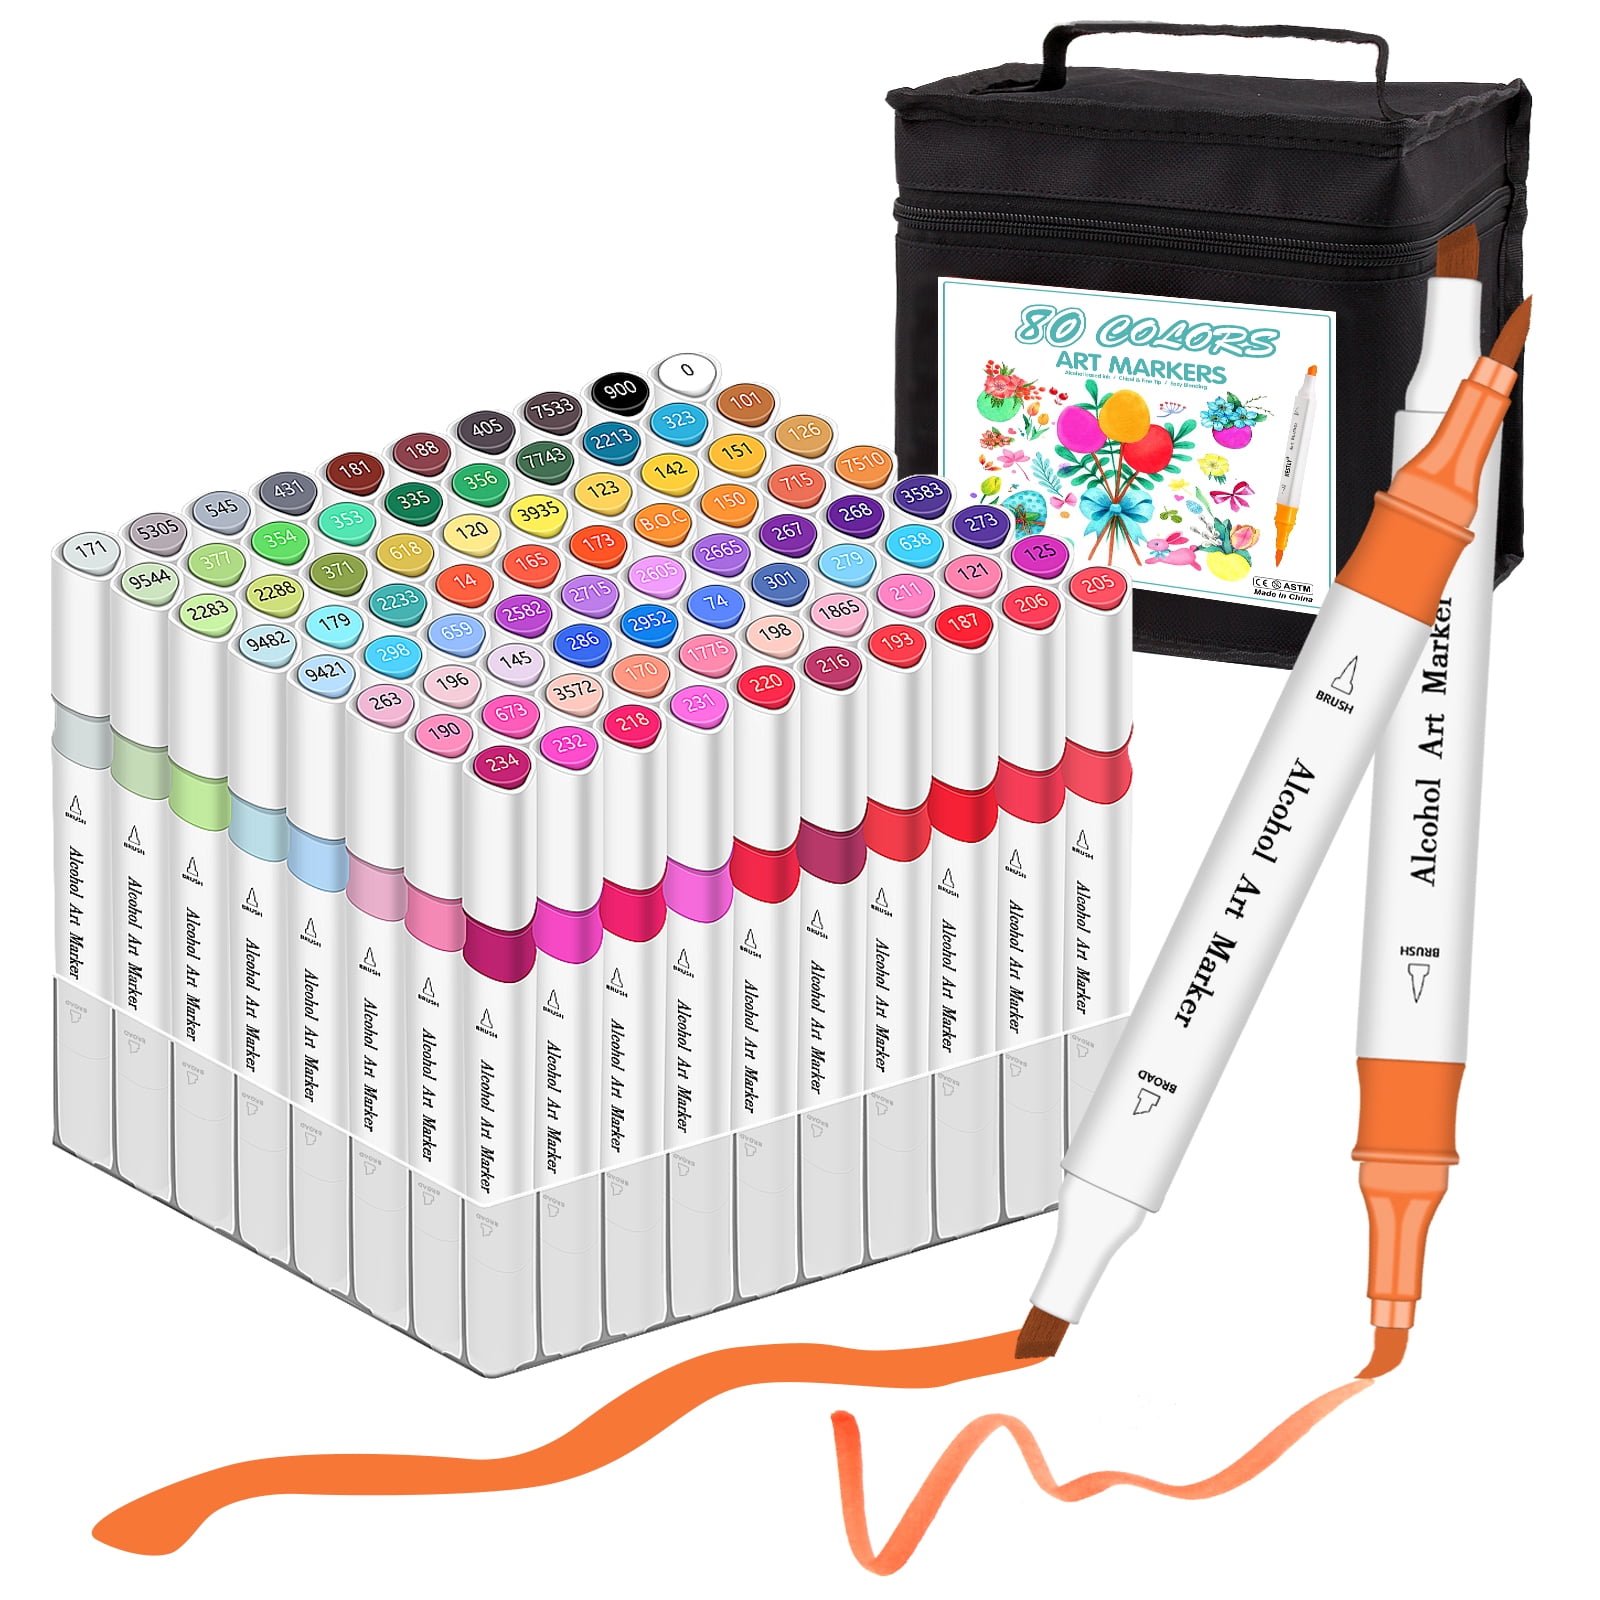  Caliart 100 Colors Artist Alcohol Markers Dual Tip